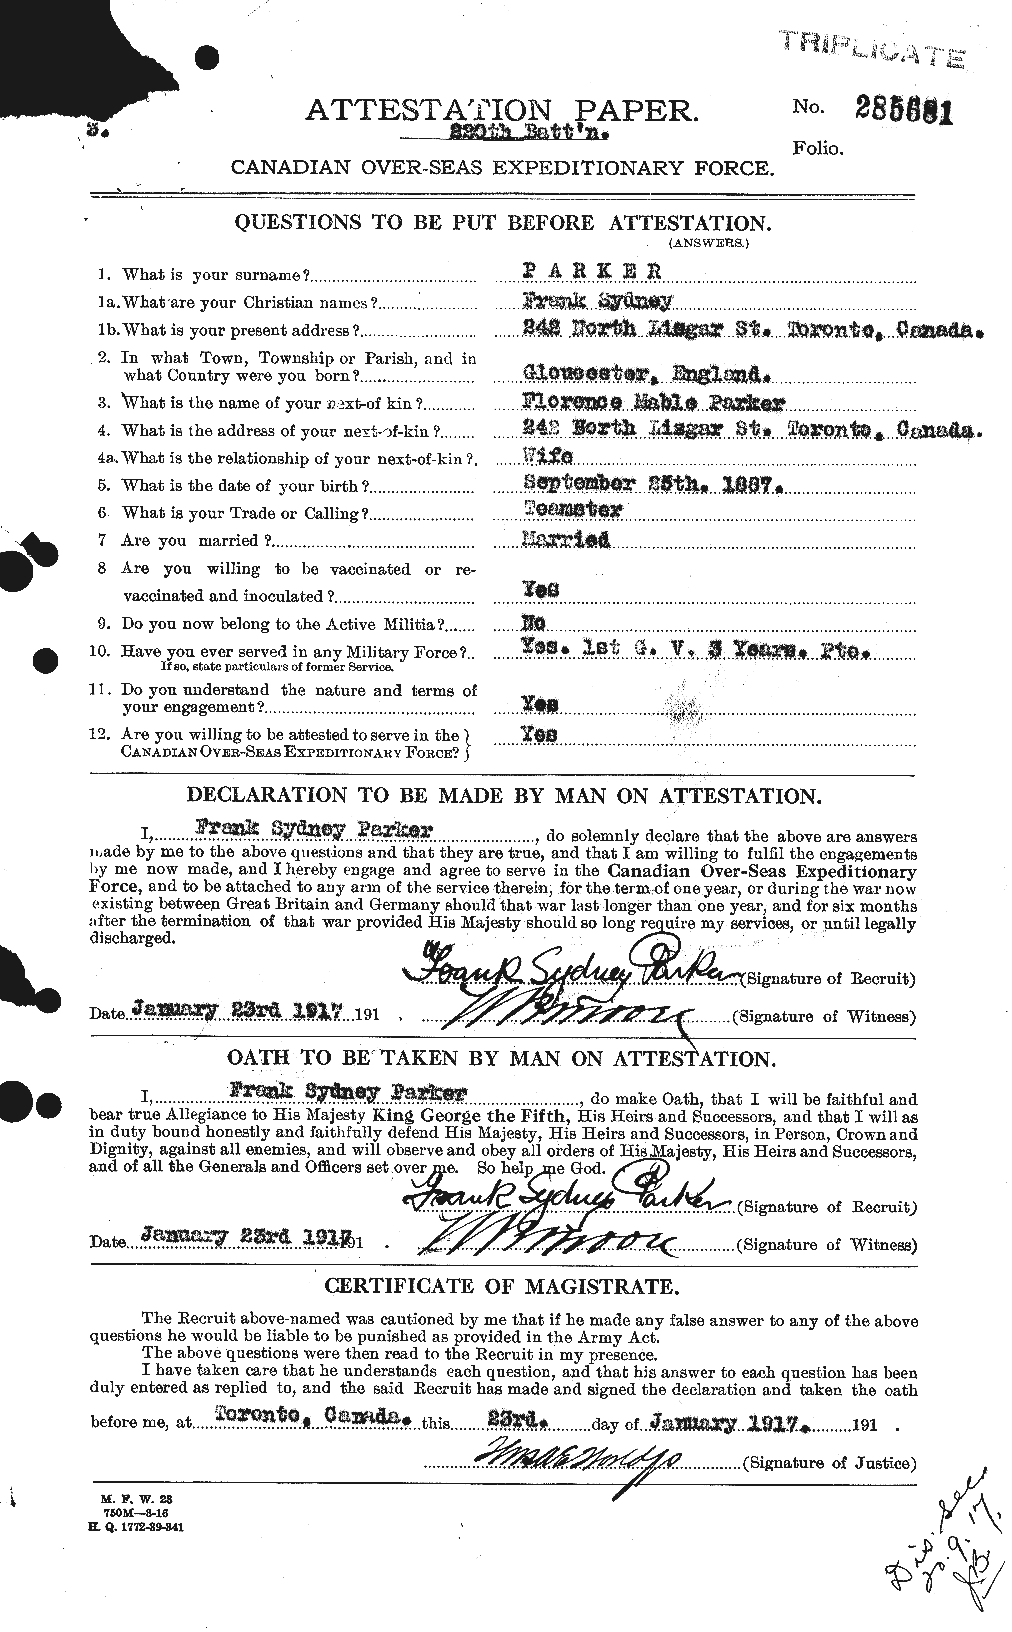 Personnel Records of the First World War - CEF 565196a